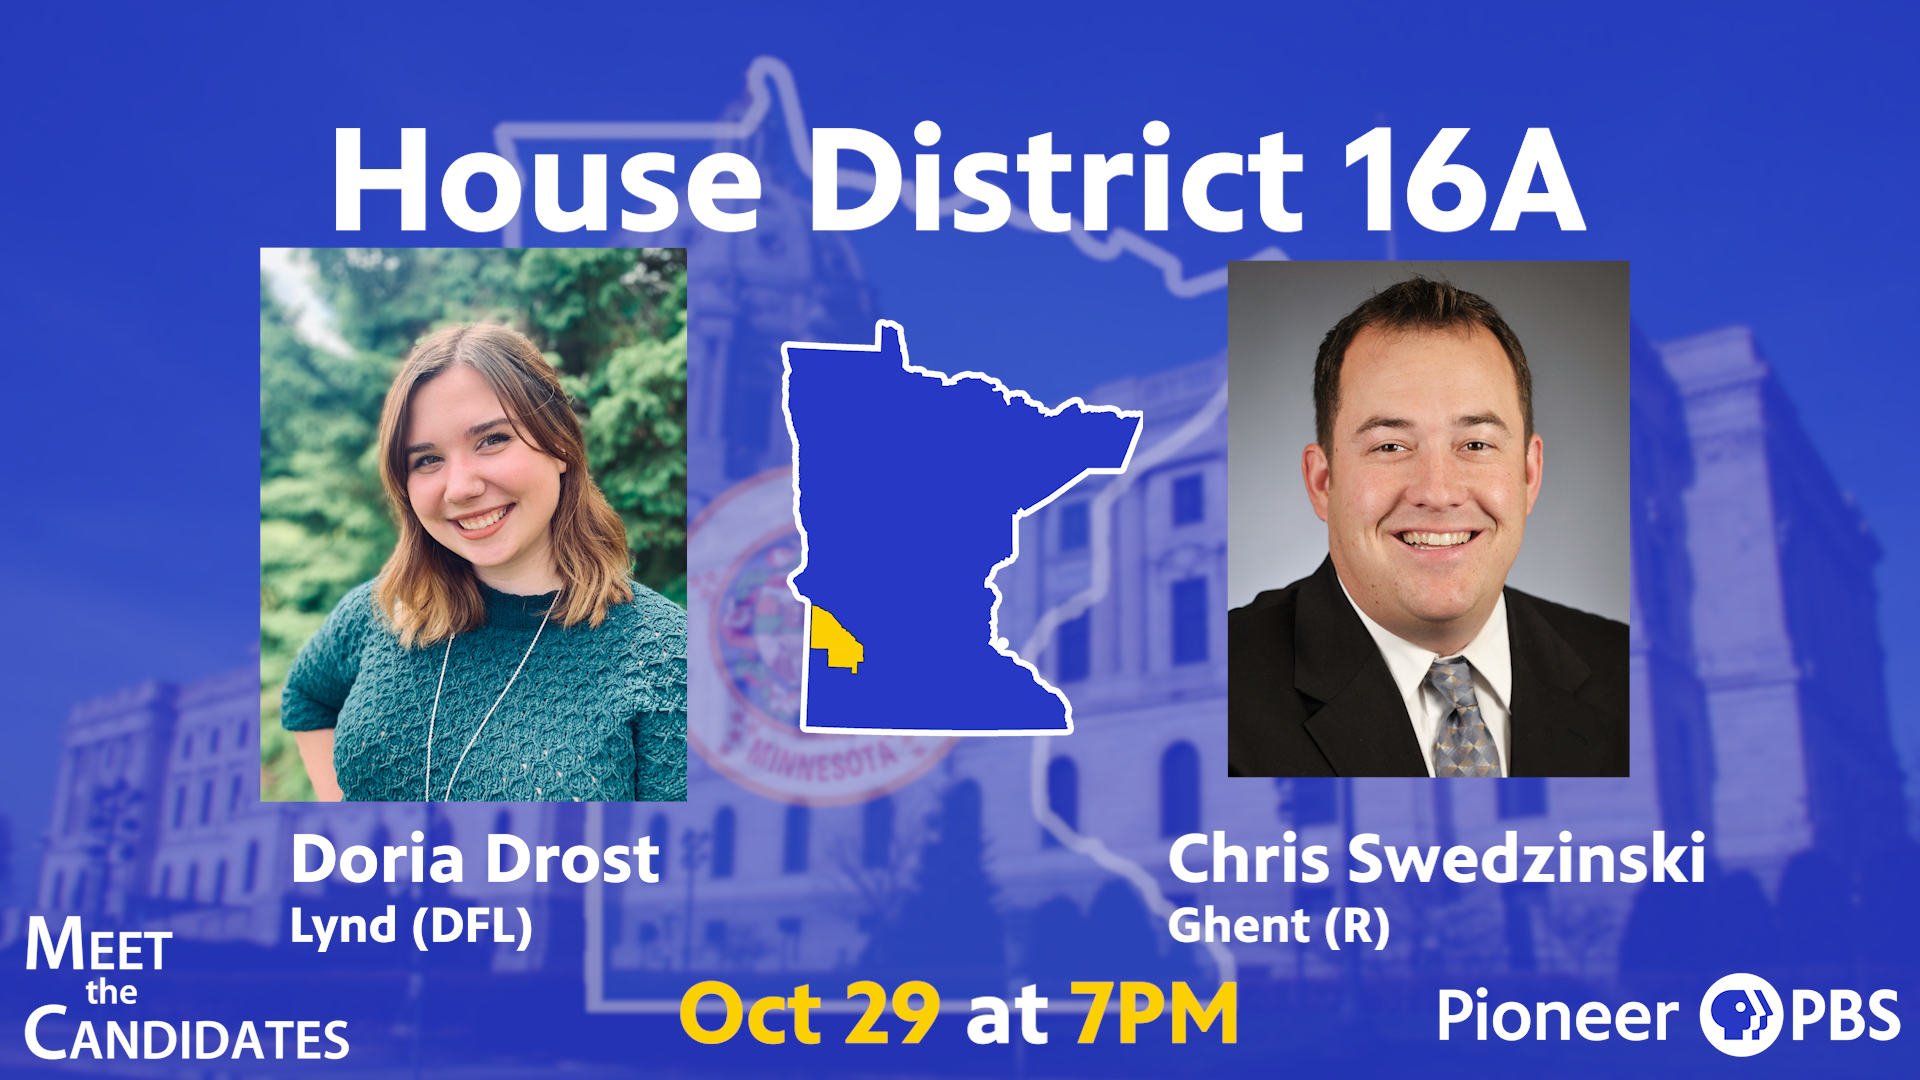 House District 16A candidates: incumbent Chris Swedzinski (R) of Ghent and challenger Doria Drost (DFL) of Lynd.